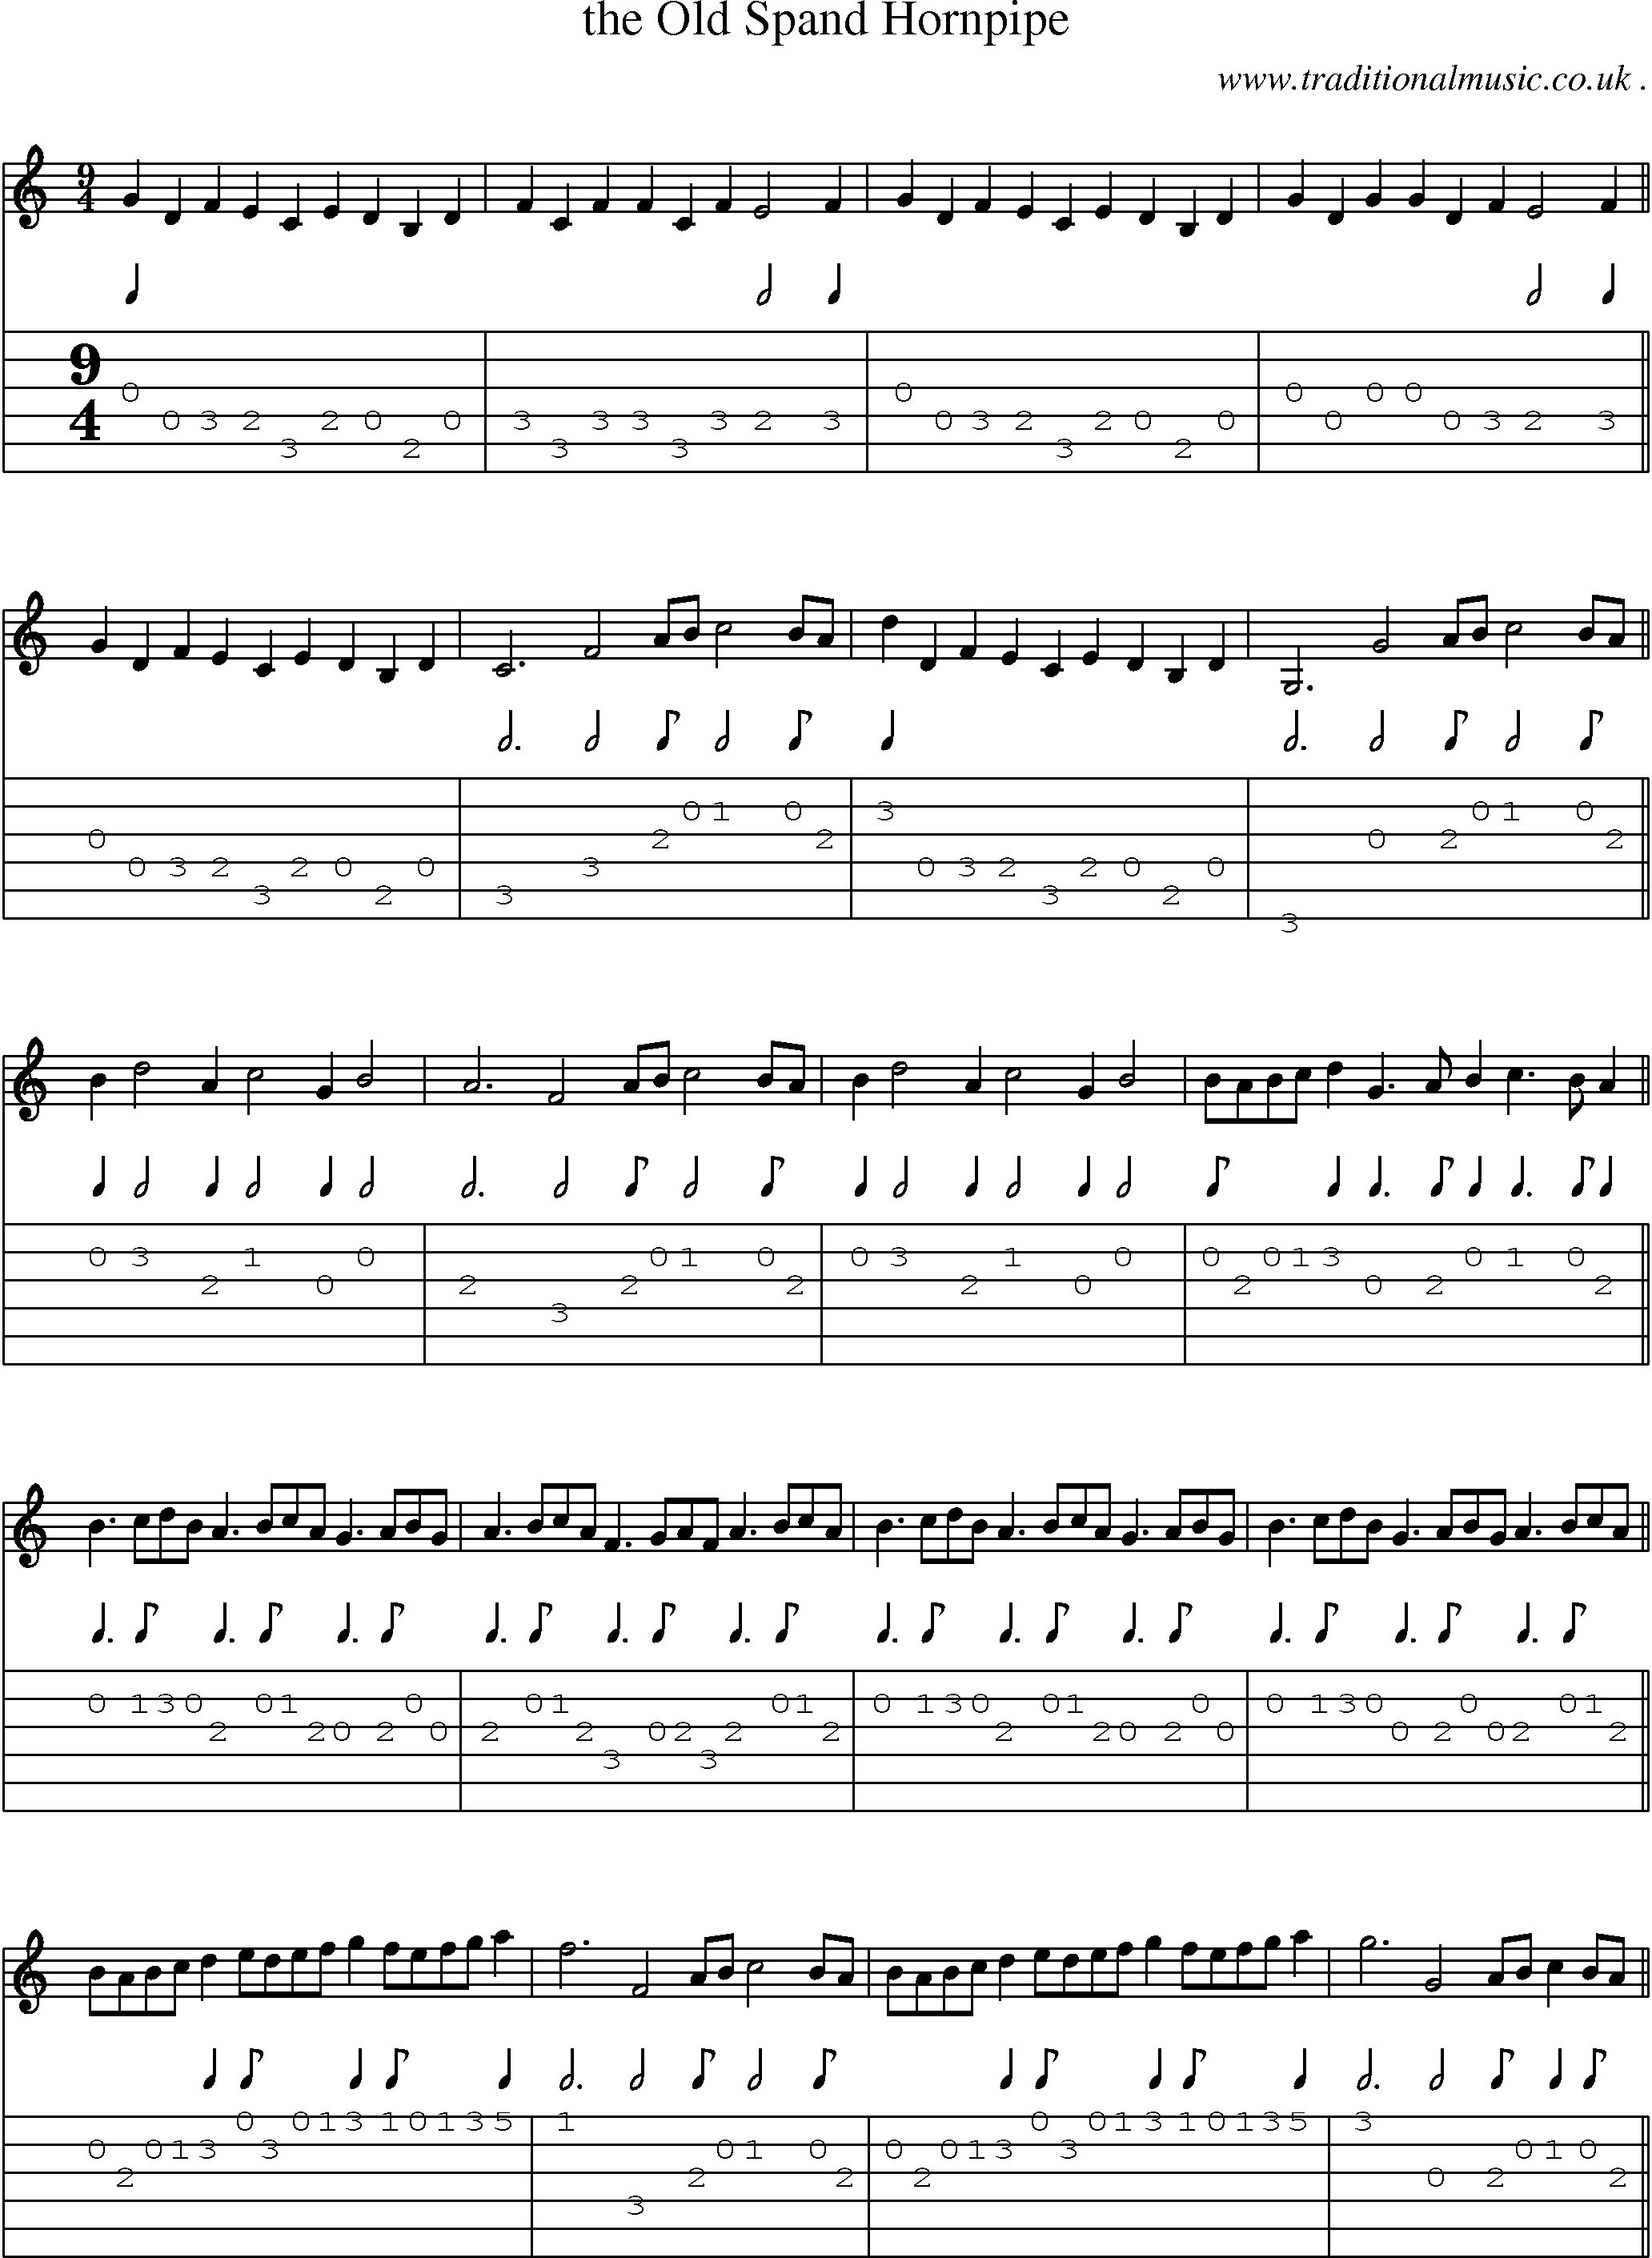 Sheet-Music and Guitar Tabs for The Old Spand Hornpipe